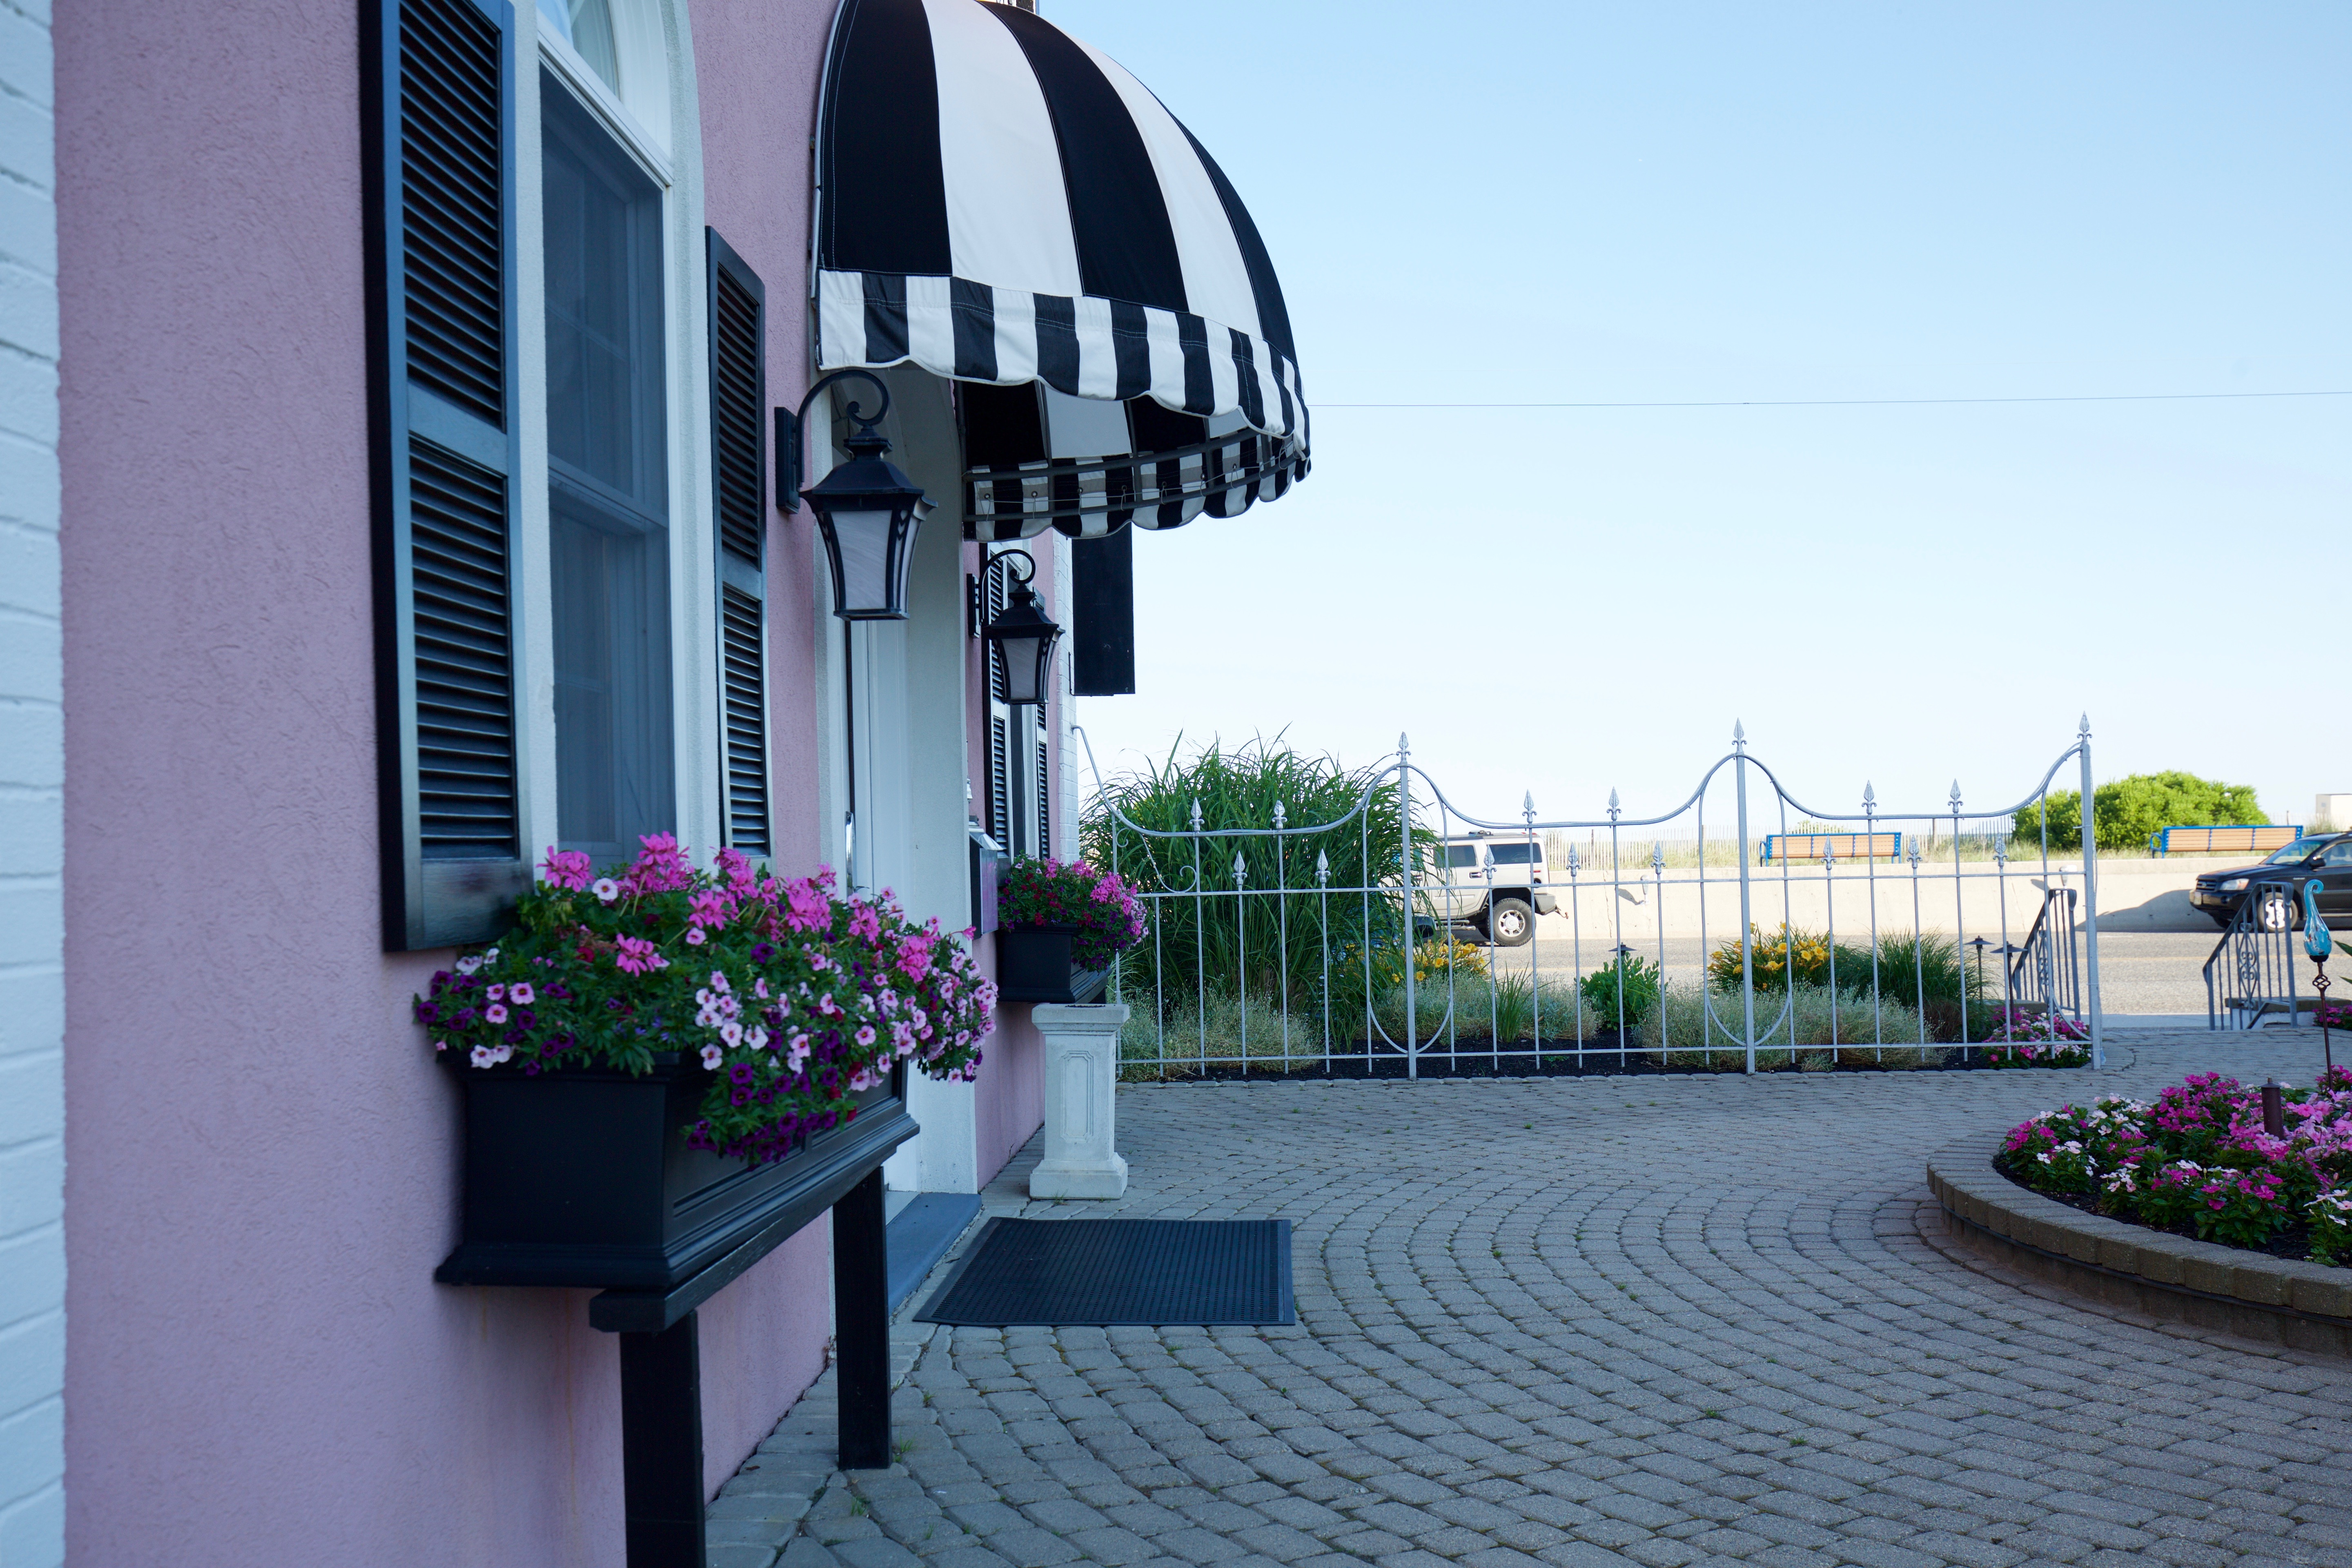 Periwinkle Inn Hotel in Cape May